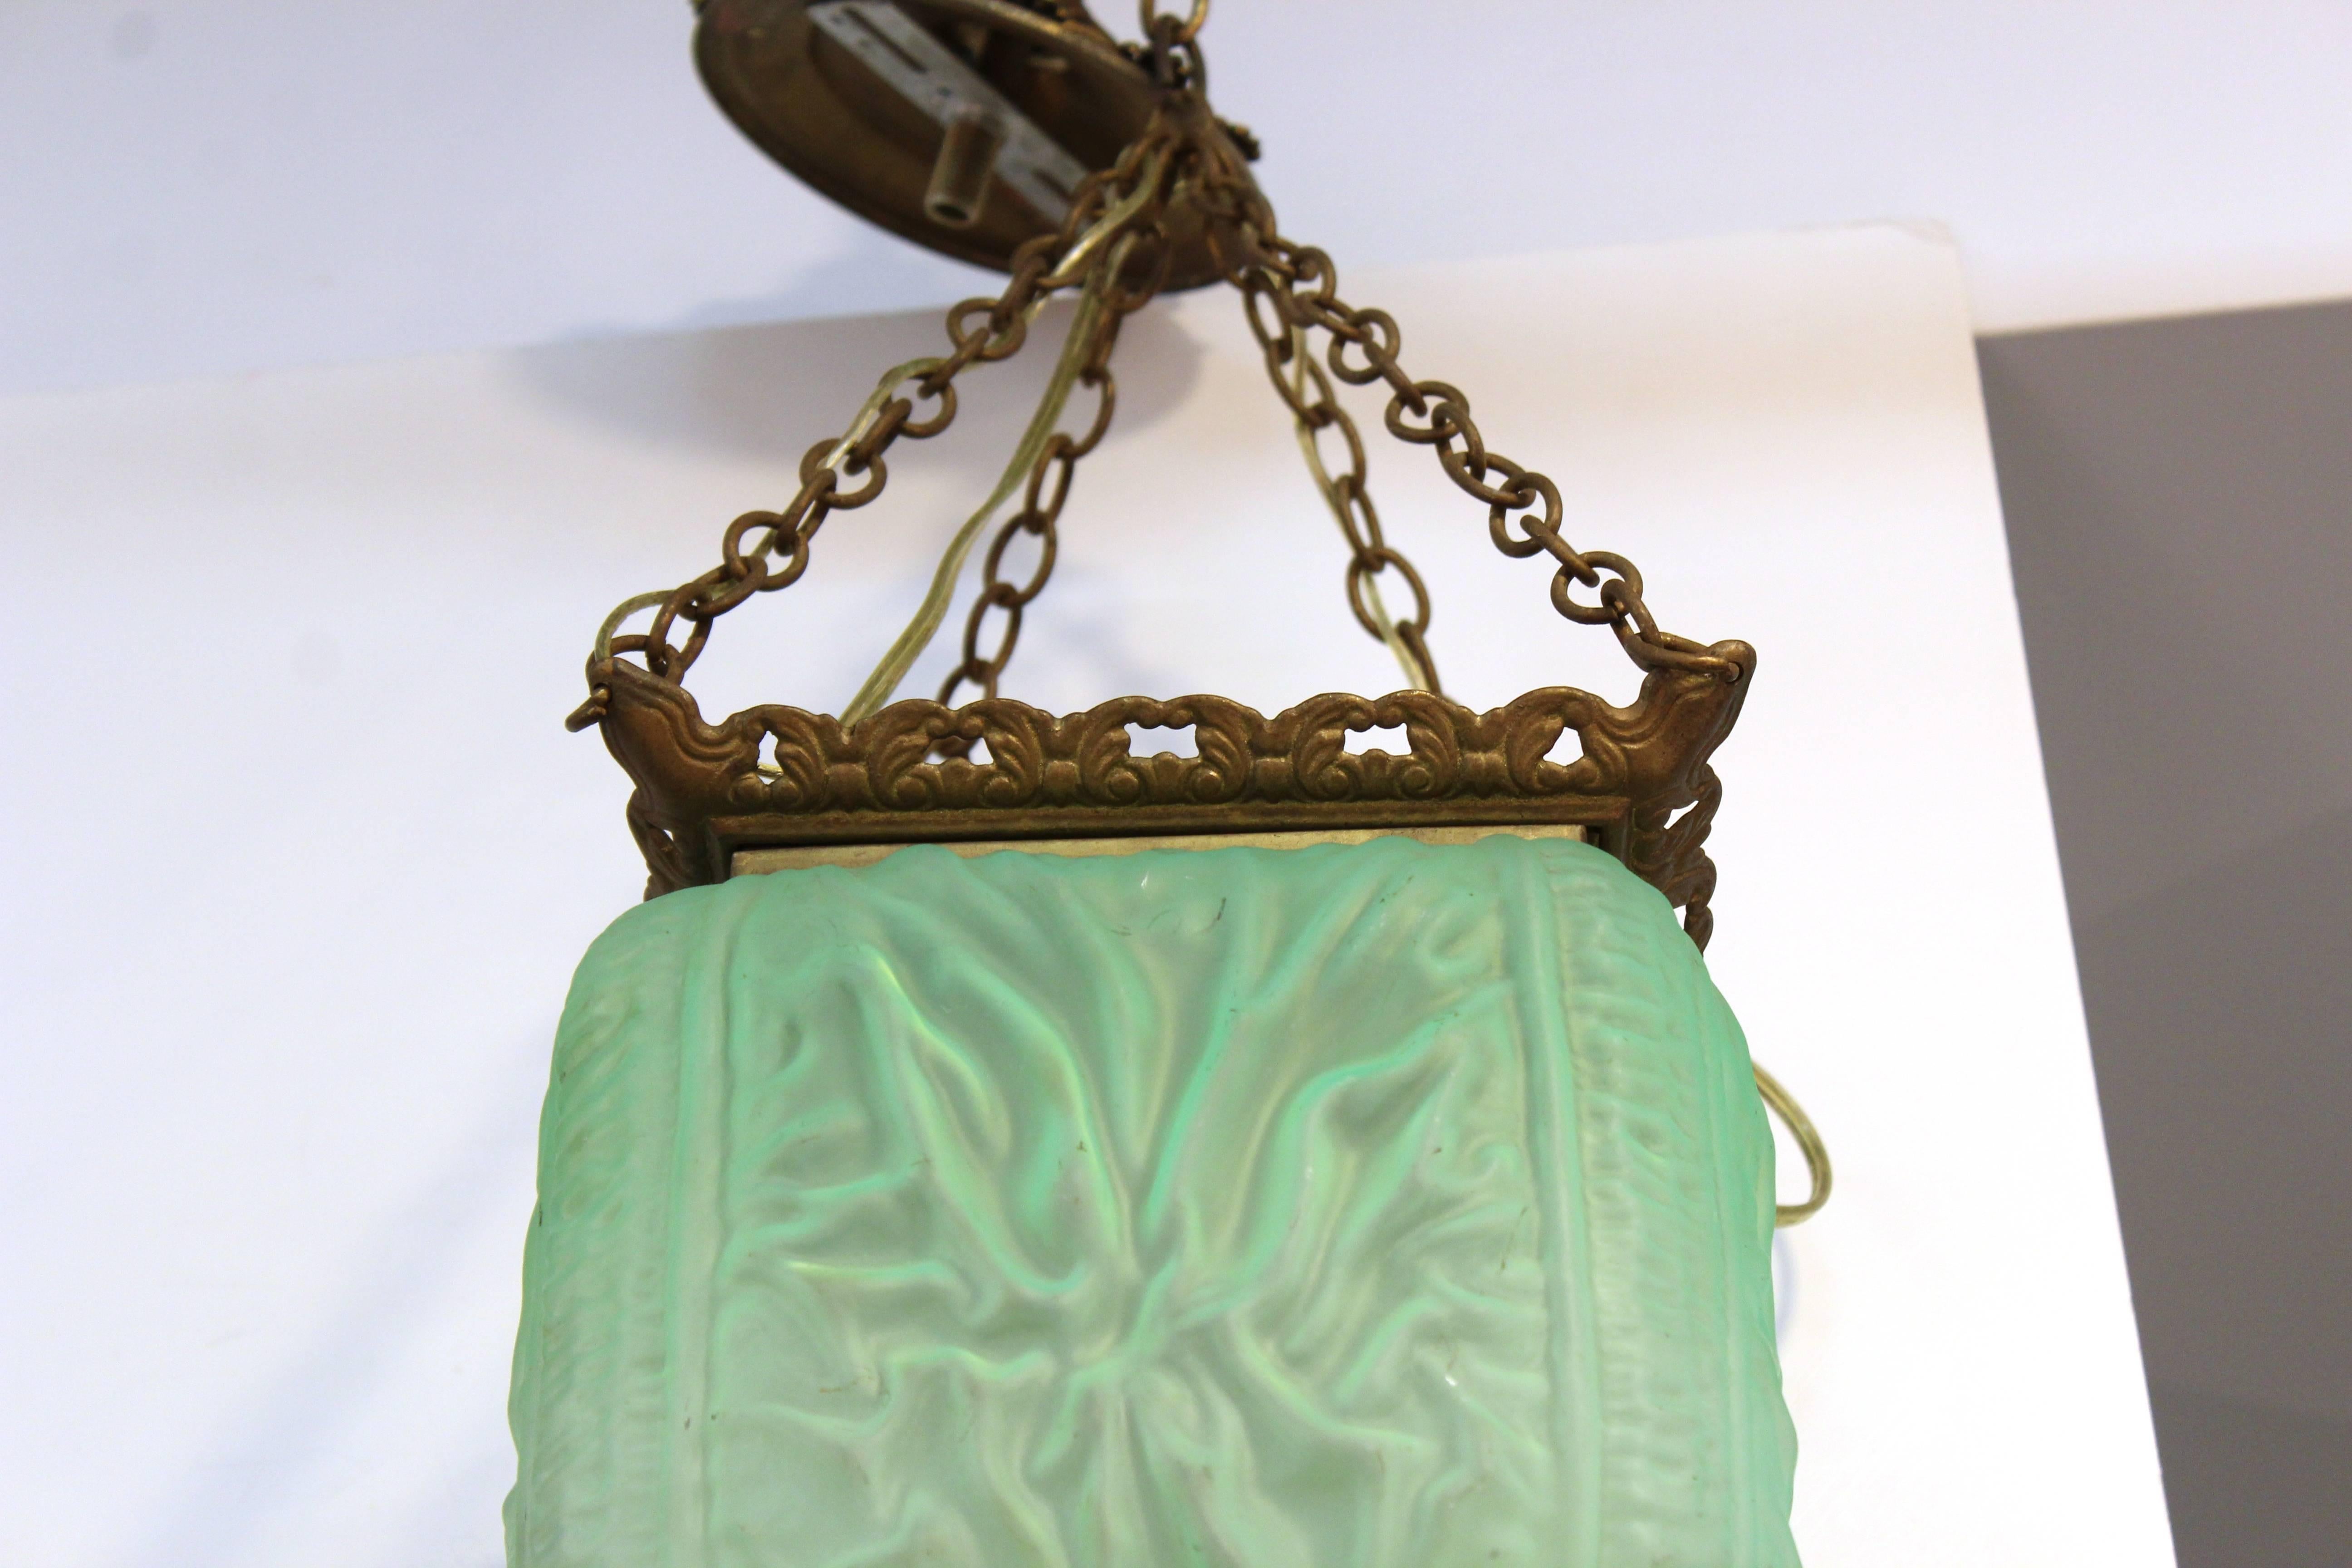 Antique chandelier with quilted satin glass dating from the 1870s. The green glass is a unique and rare color. Includes the original brass canopy and fittings. Newly re-wired. Takes Edison base bulbs. The pendant is in excellent condition.